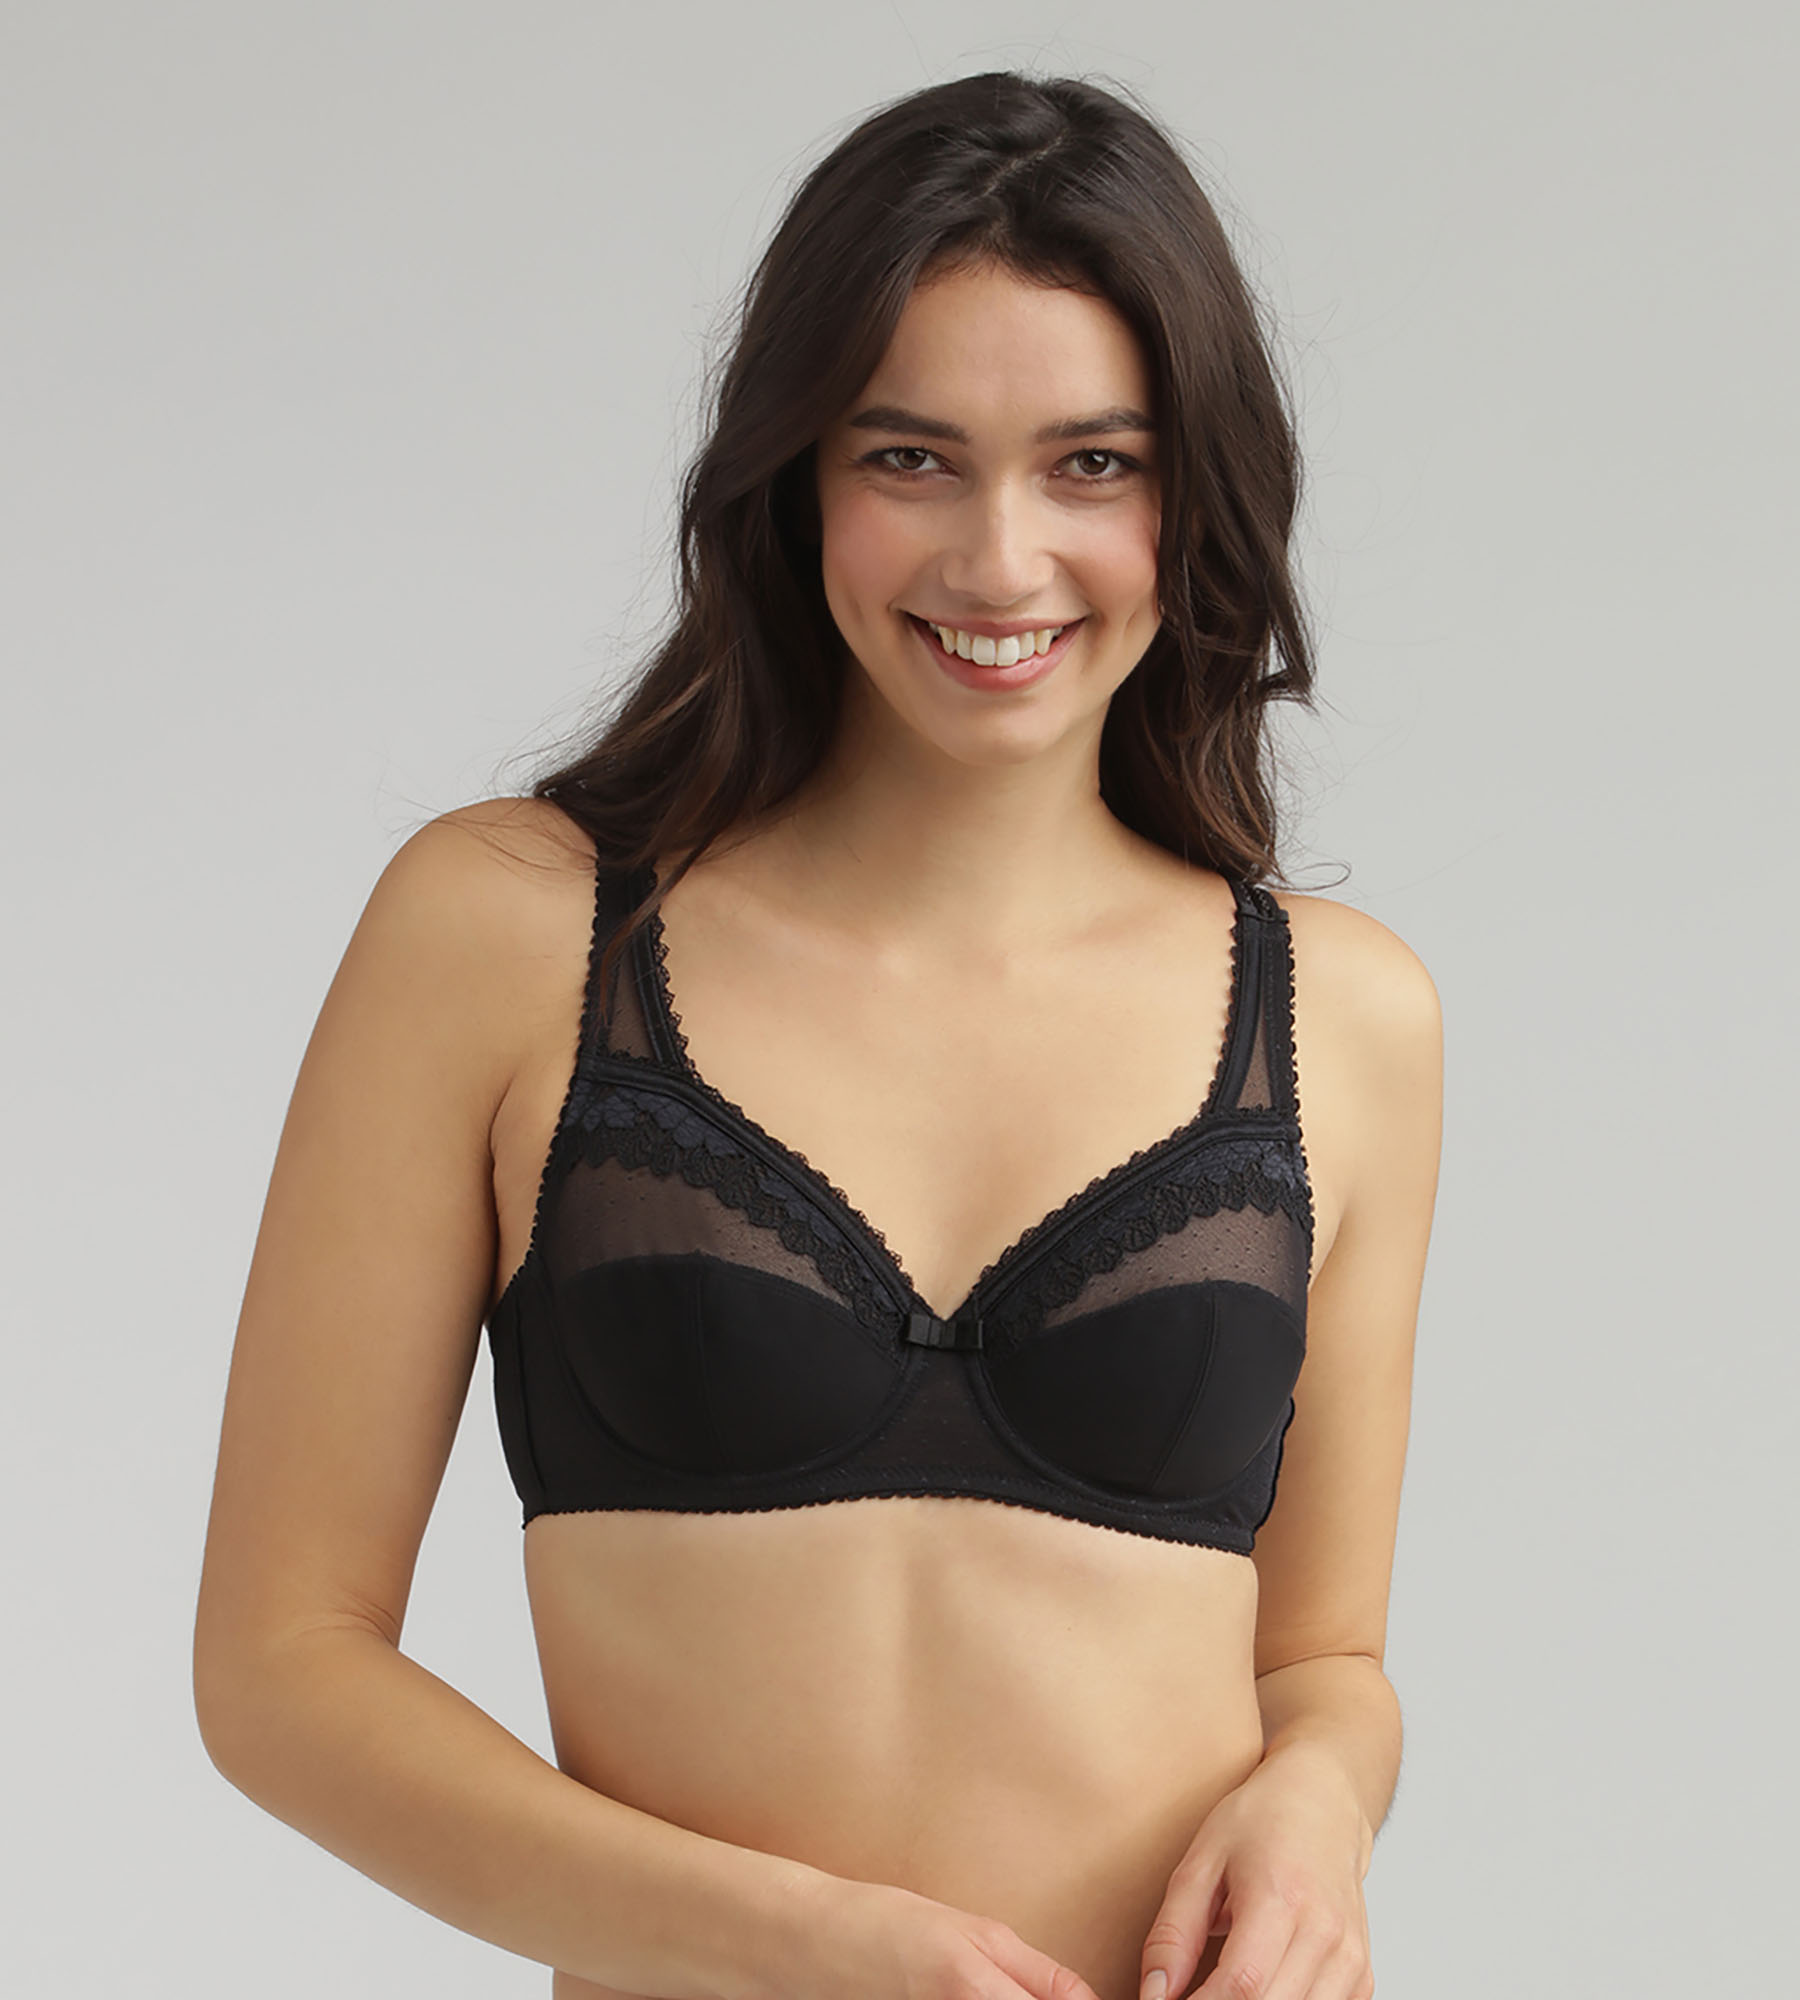 Full cup bra in black Classic Micro Support, , PLAYTEX